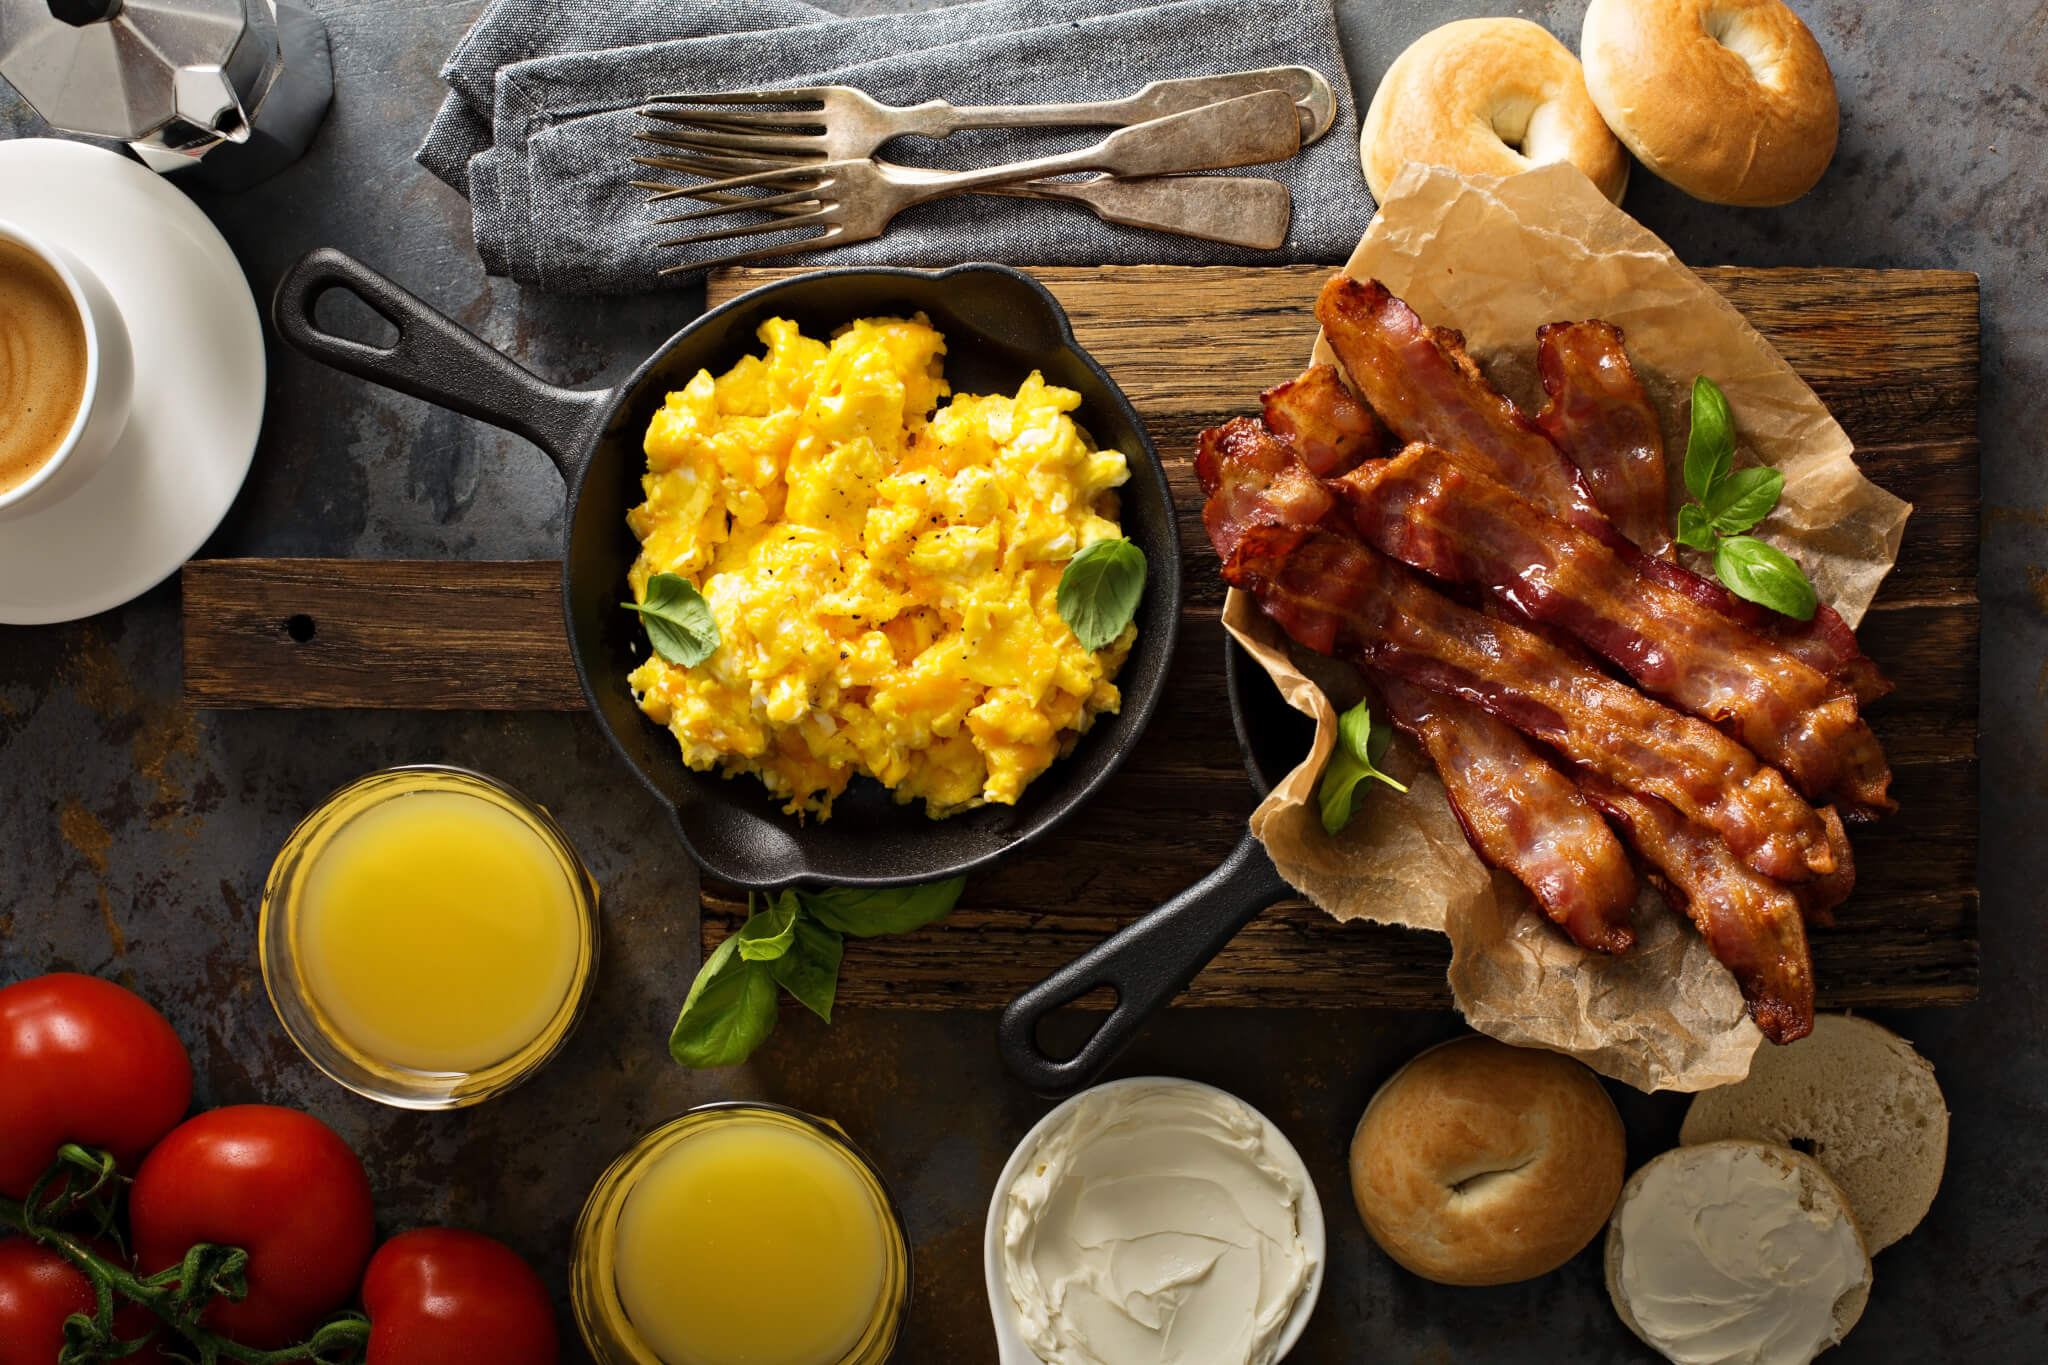 Big breakfast with bacon and eggs